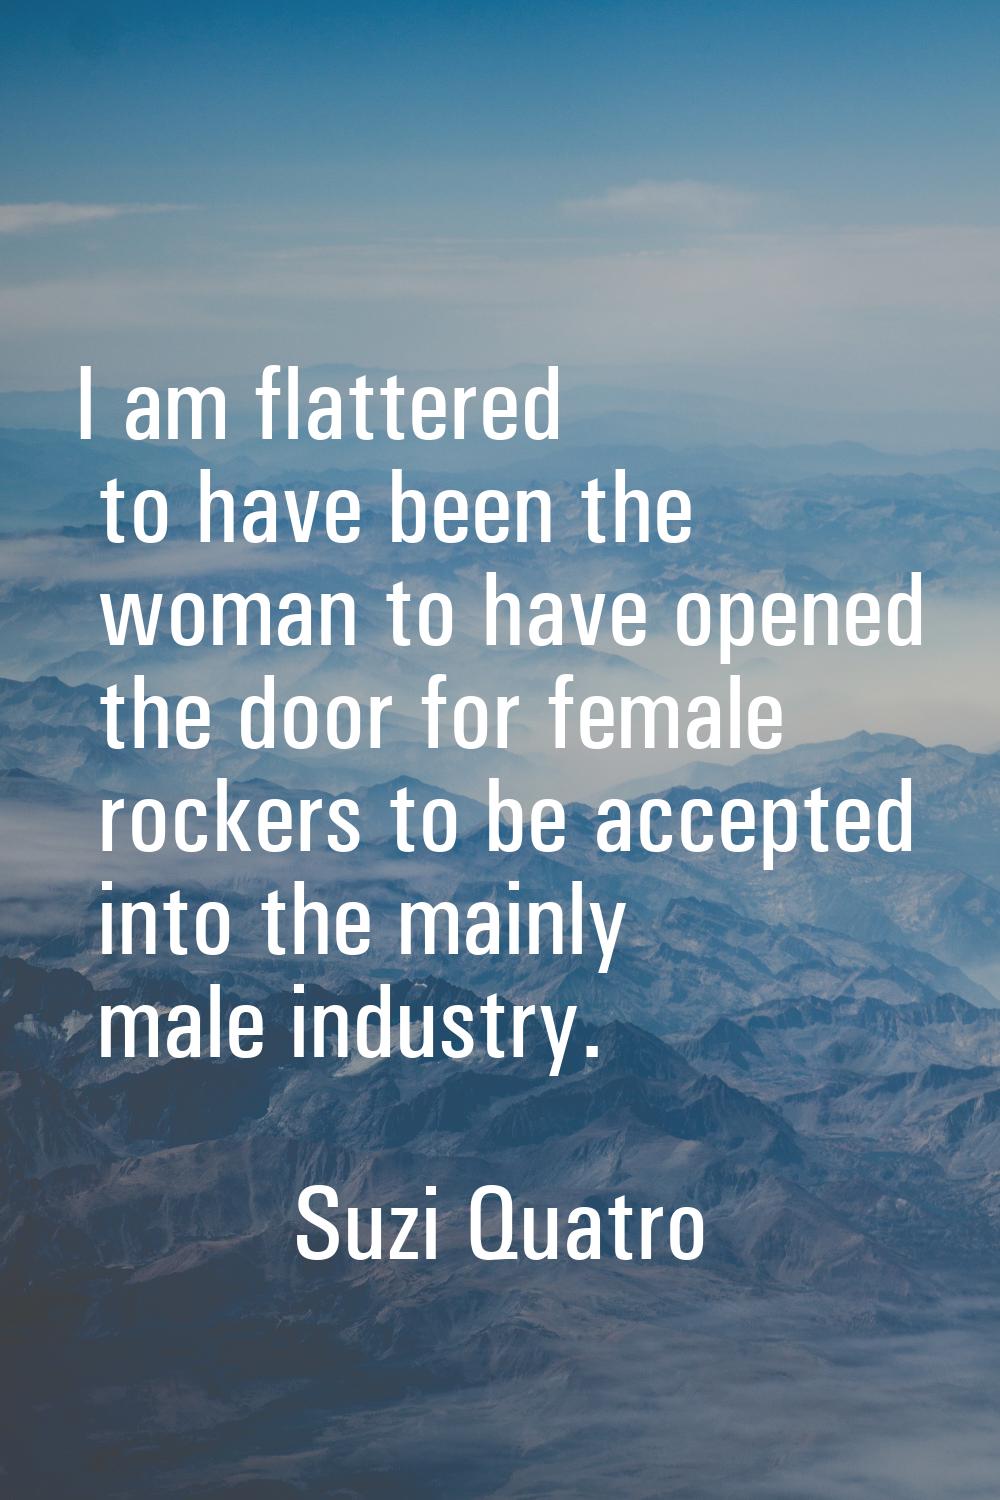 I am flattered to have been the woman to have opened the door for female rockers to be accepted int